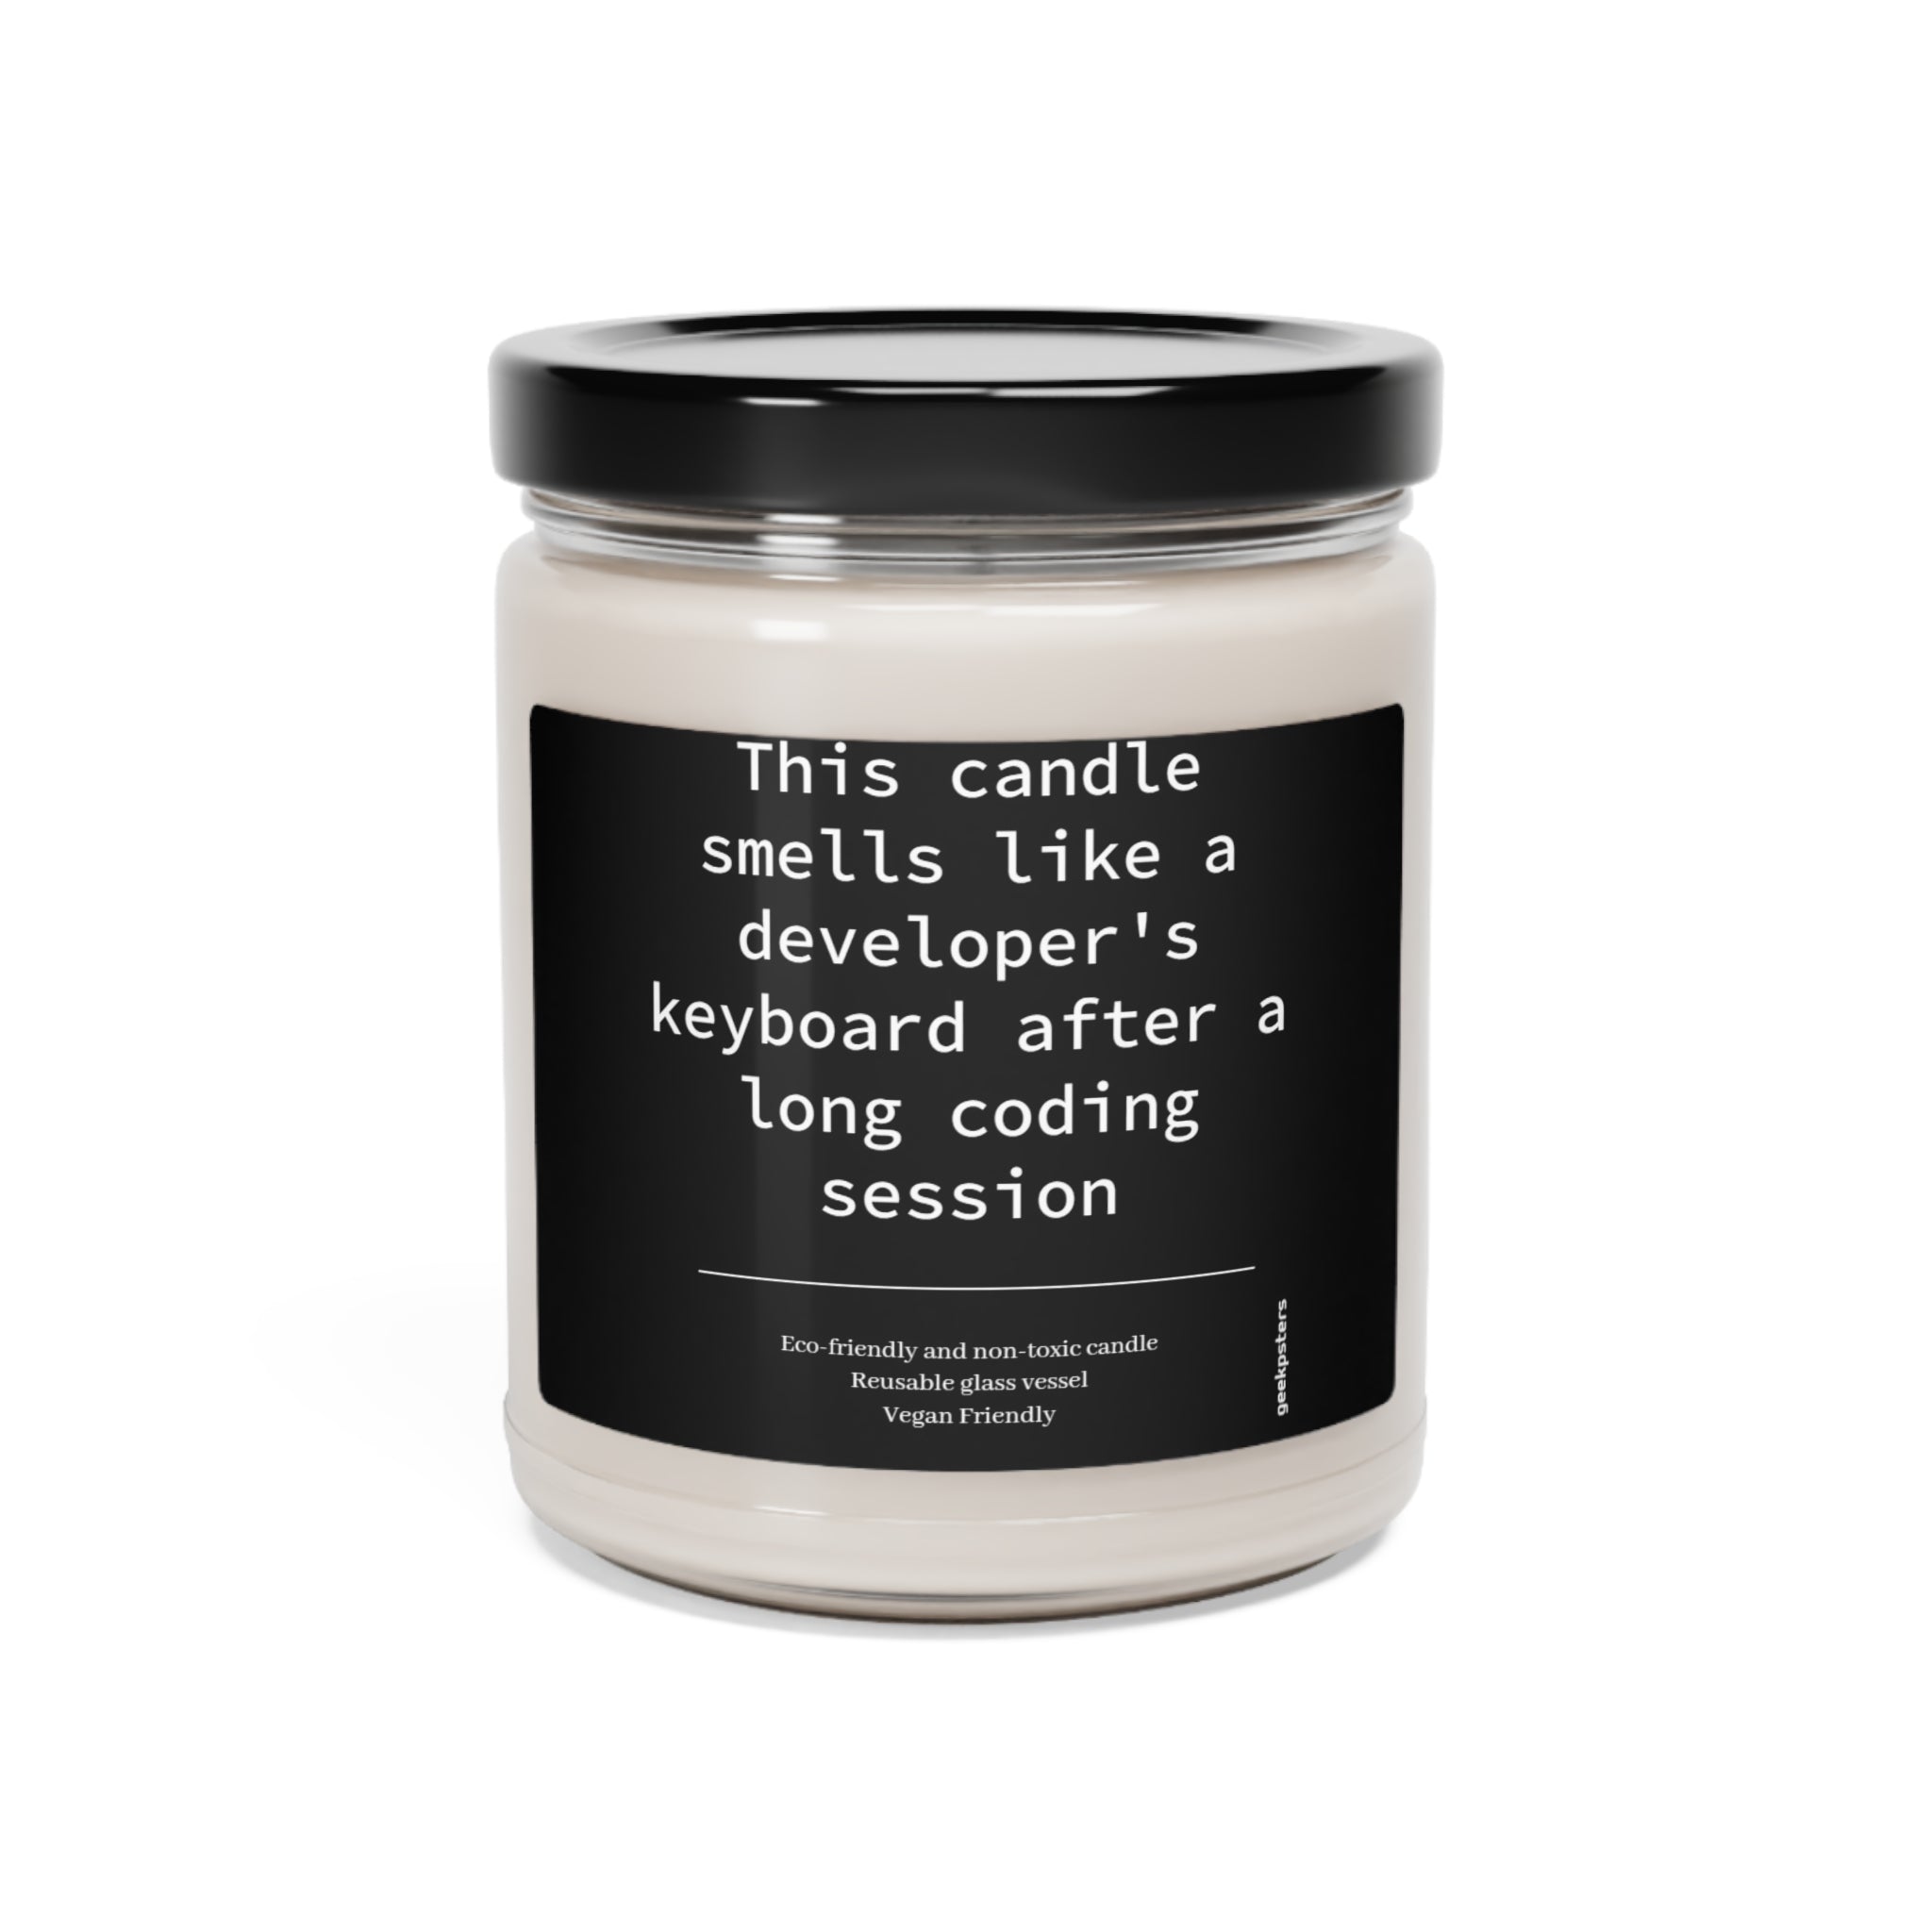 A novelty candle, encased in glass jars and labeled as smelling like a This candle smells like a developer's keyboard after a long coding session - Scented Soy Candle, 9oz.